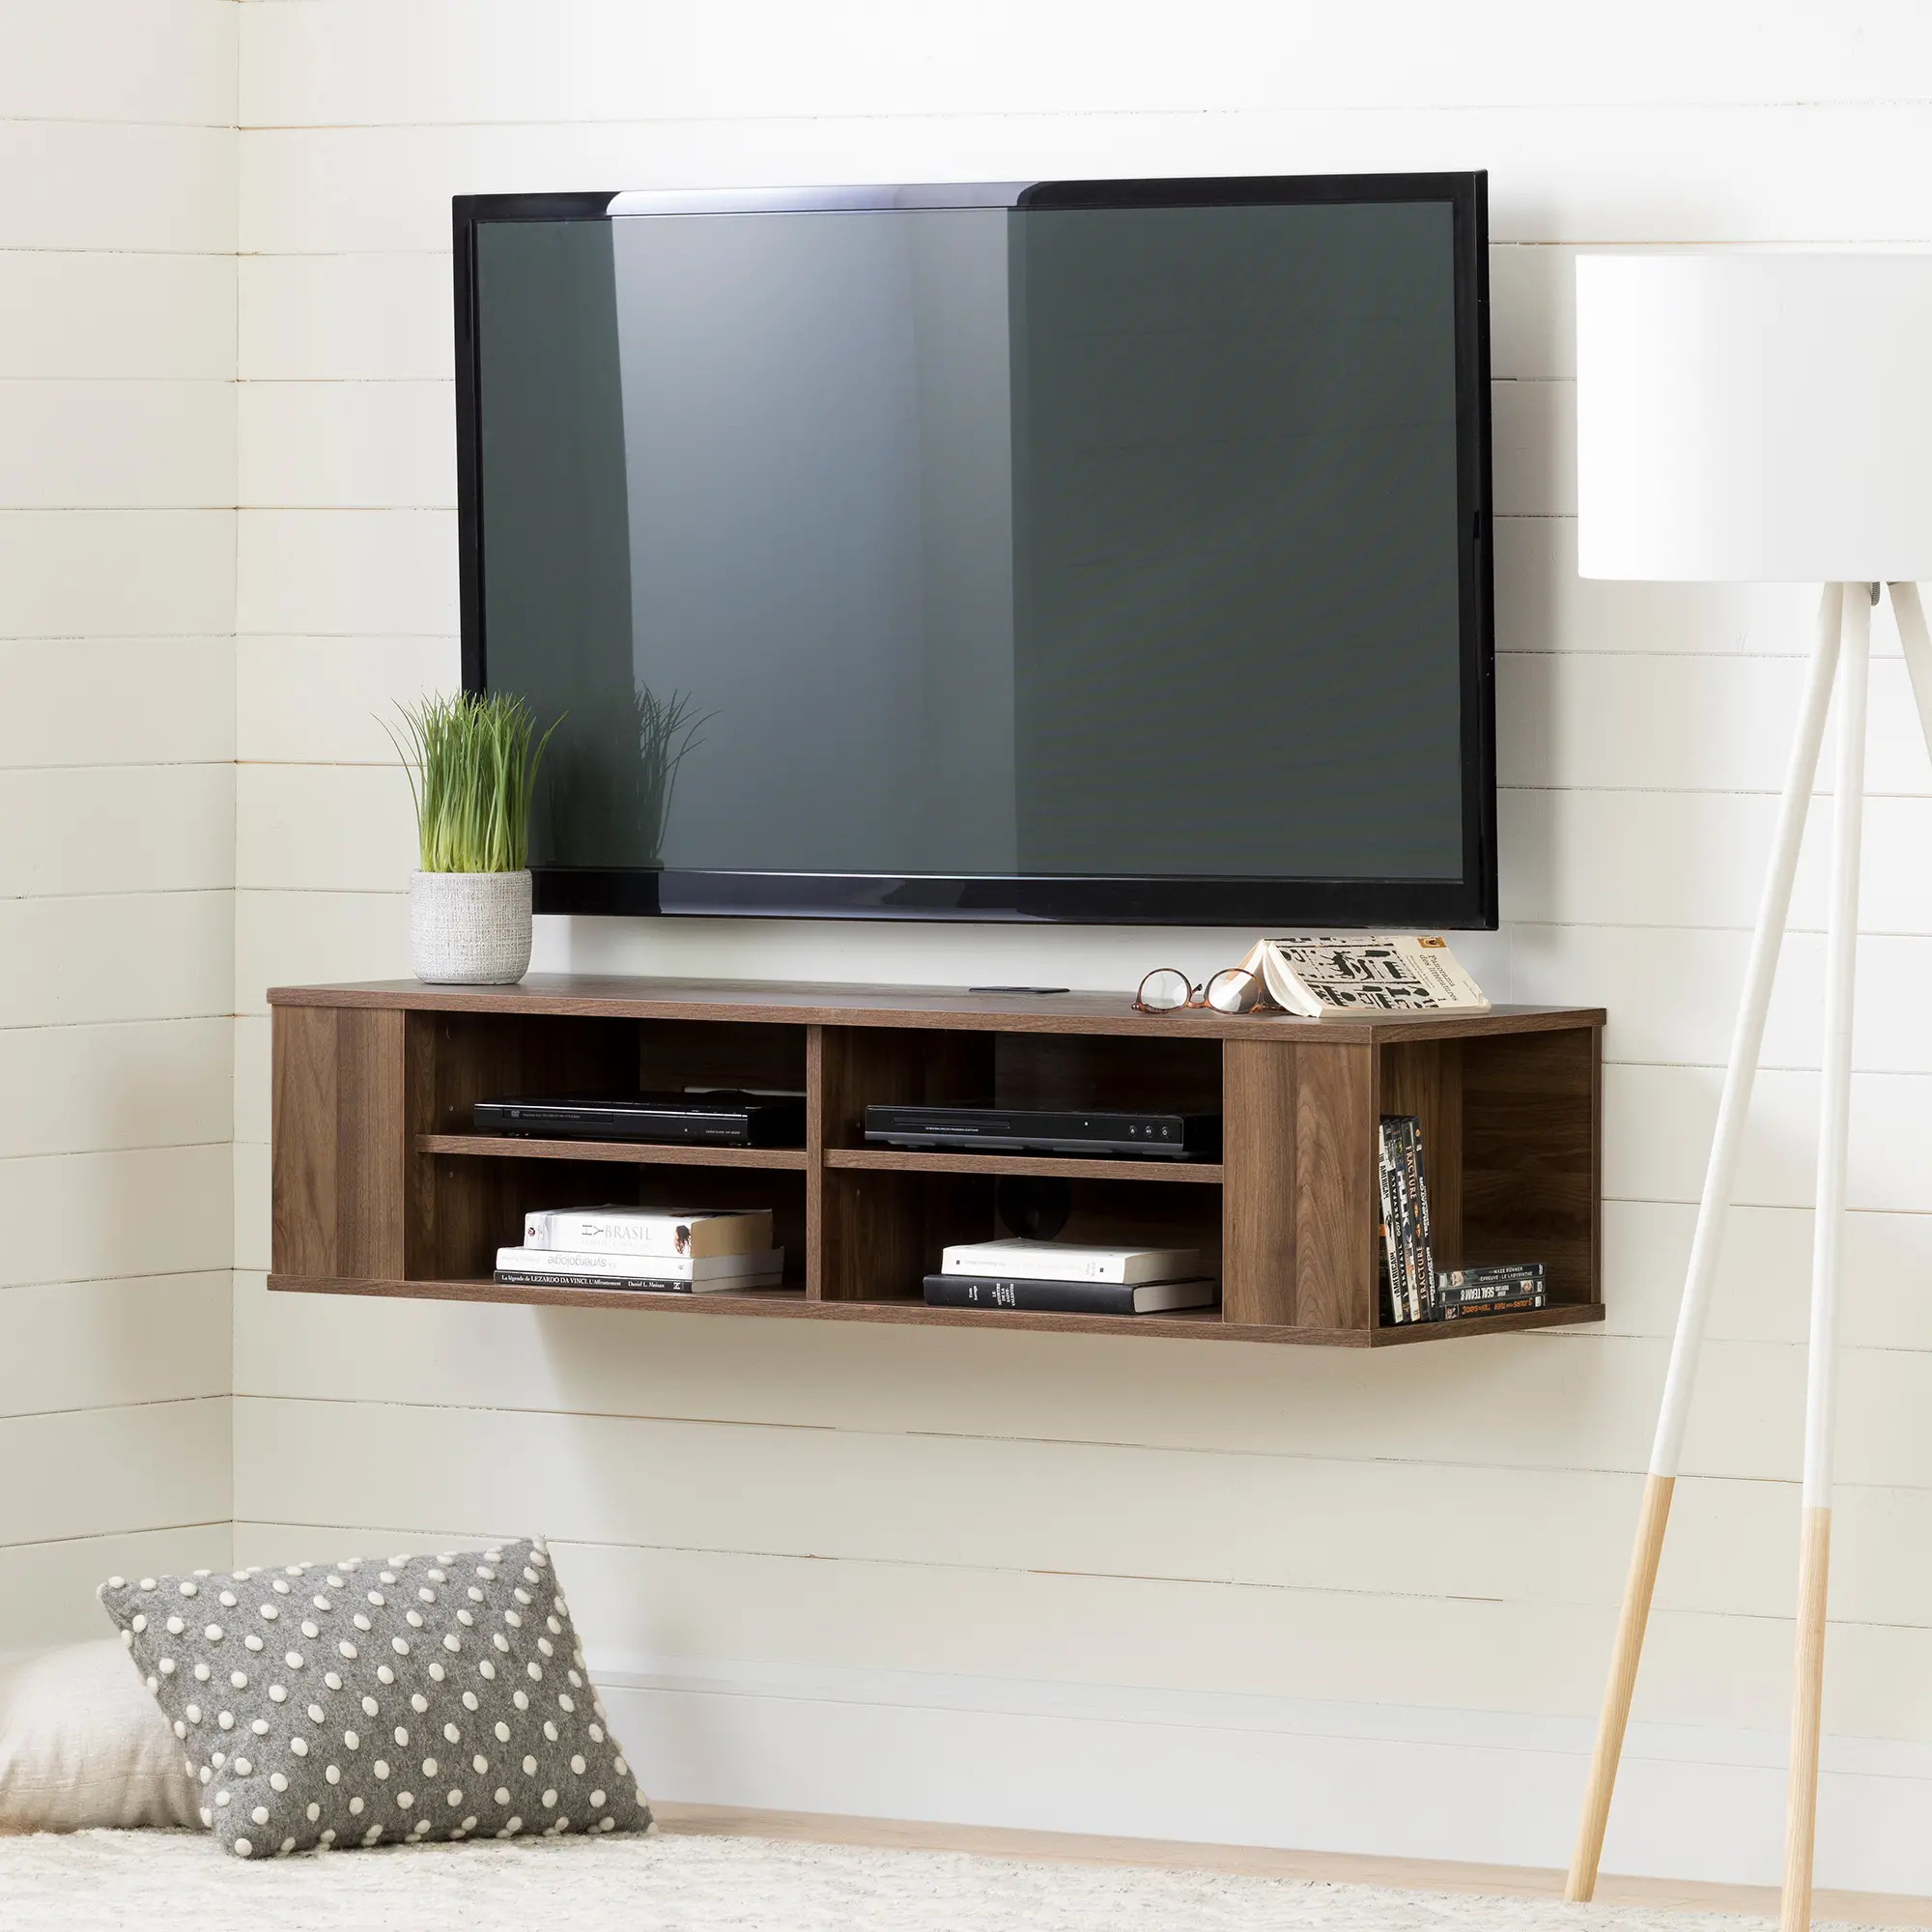 City Life Natural Walnut 48 Inch Wall Mounted Media Console -...